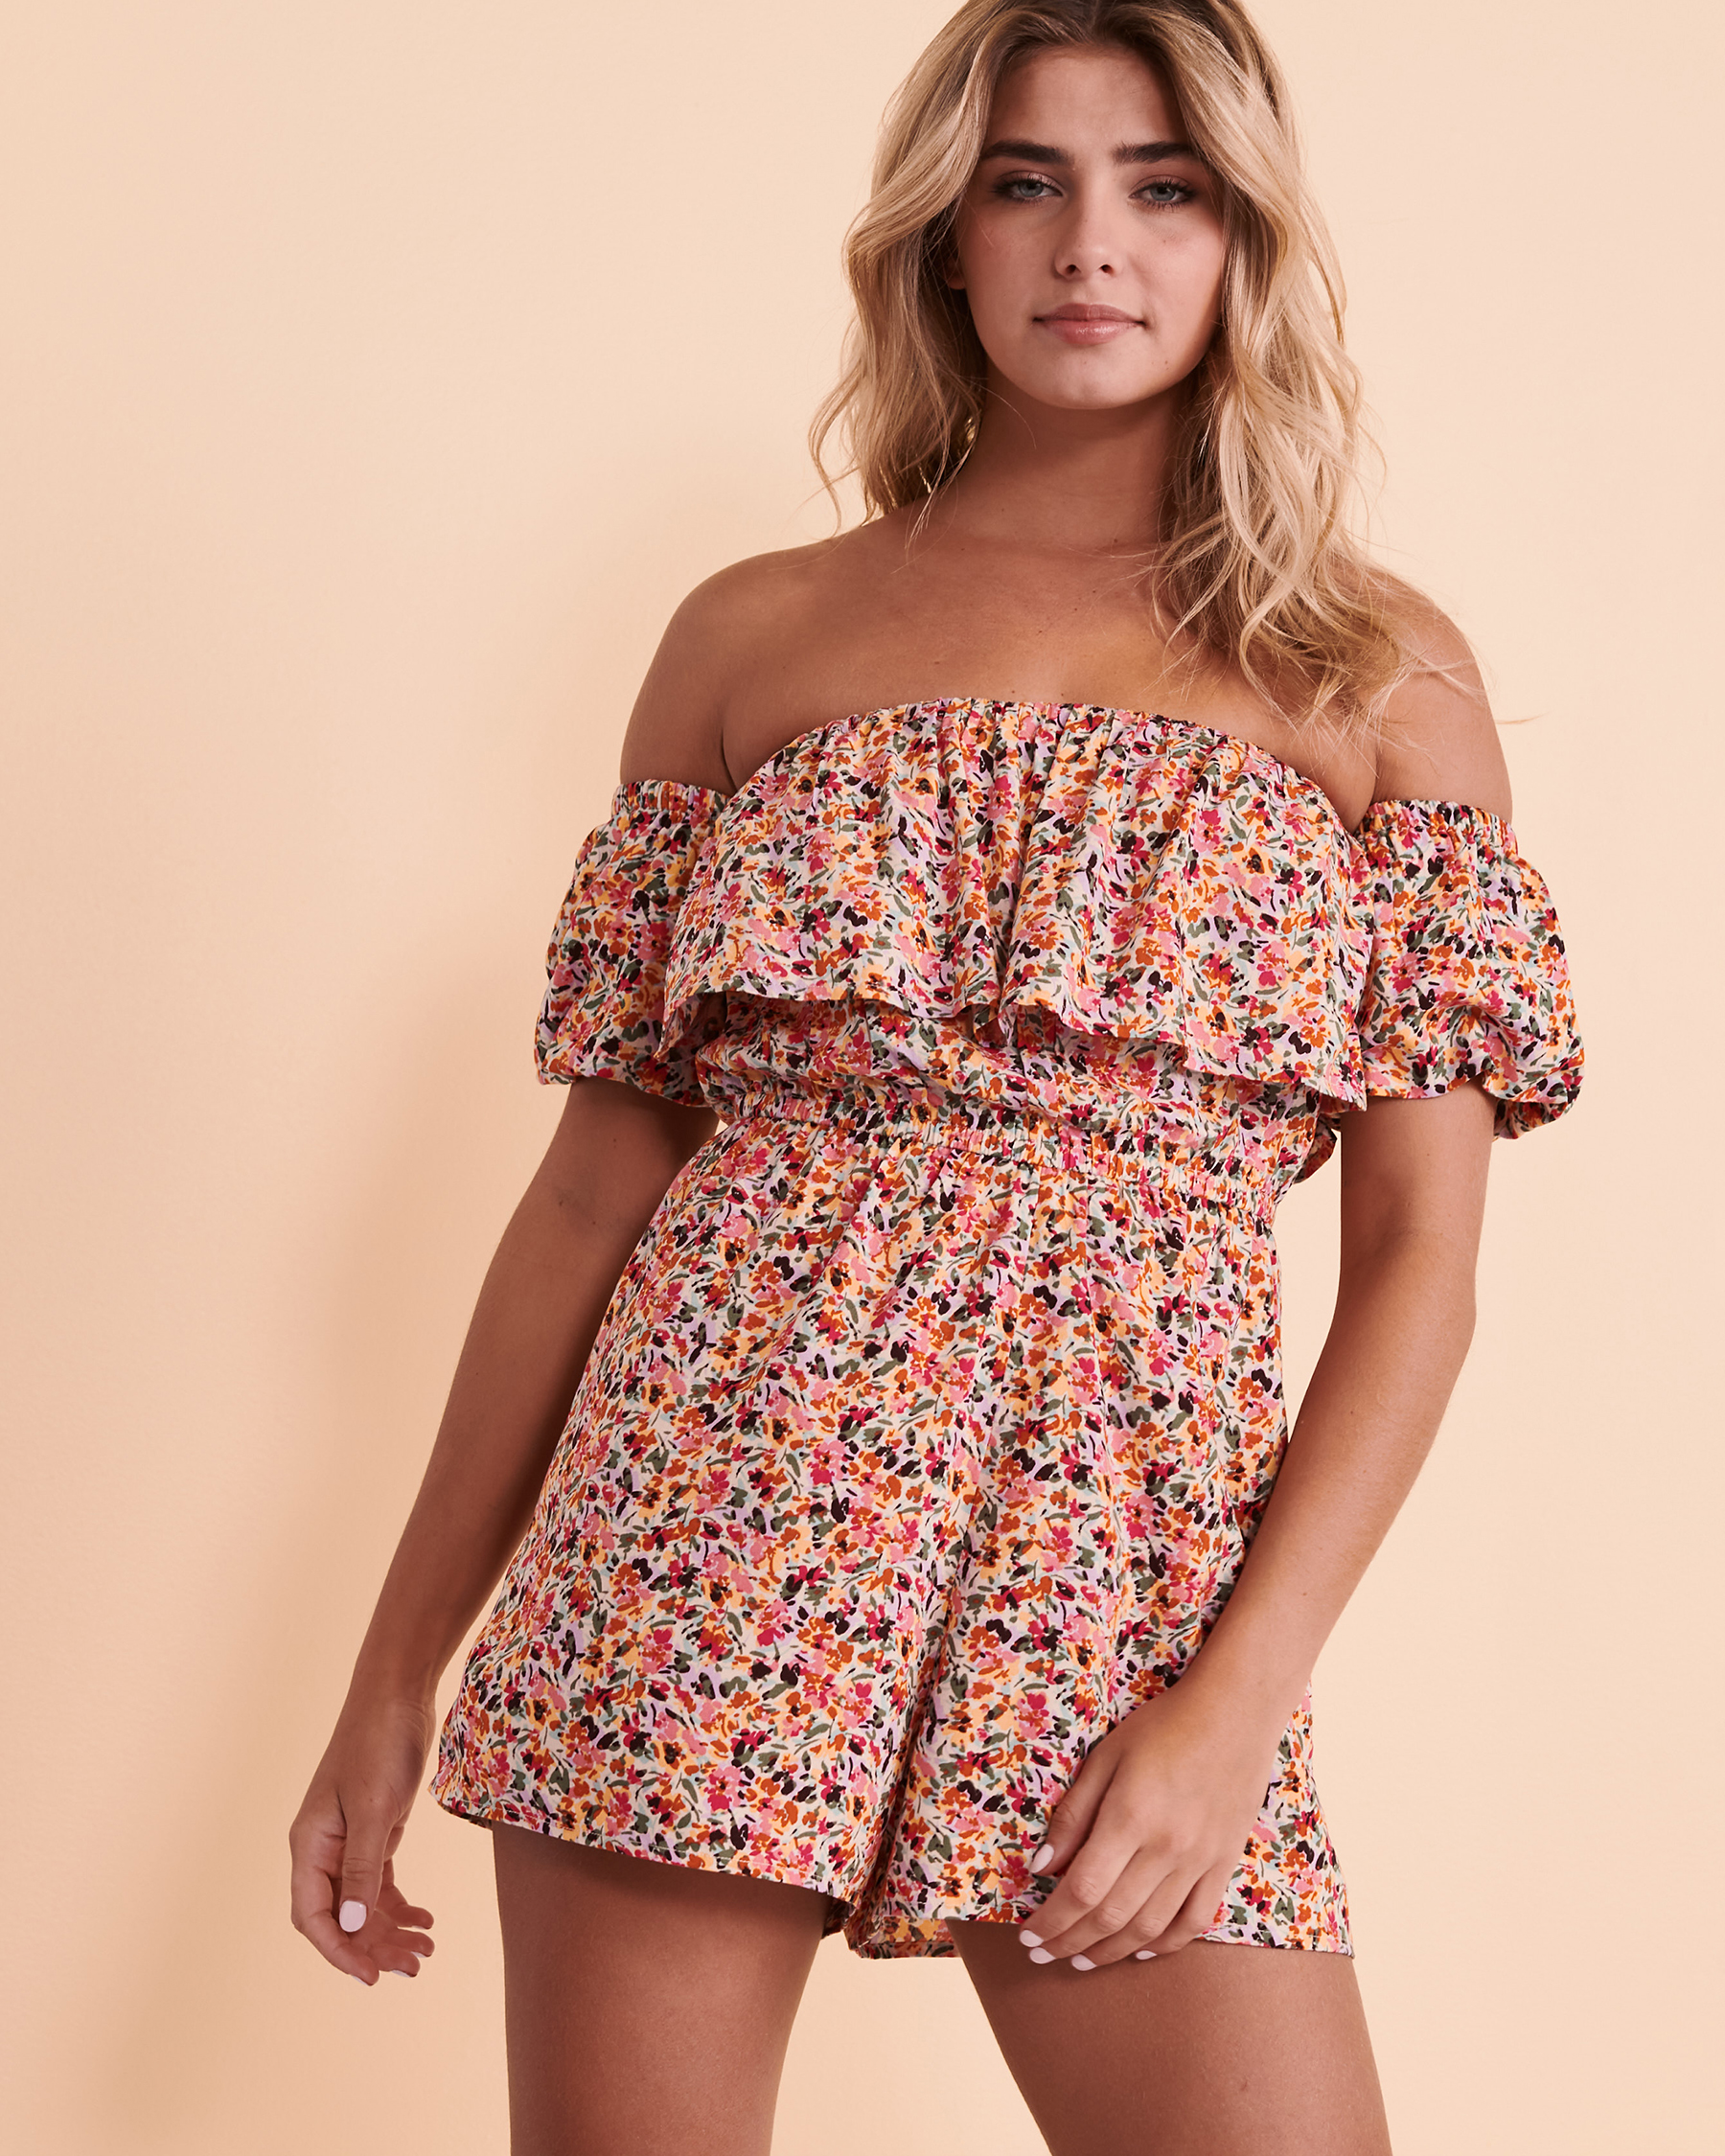 ROXY ANOTHER DAY Off-the-shoulder Romper Floral ARJWD03455 - View1